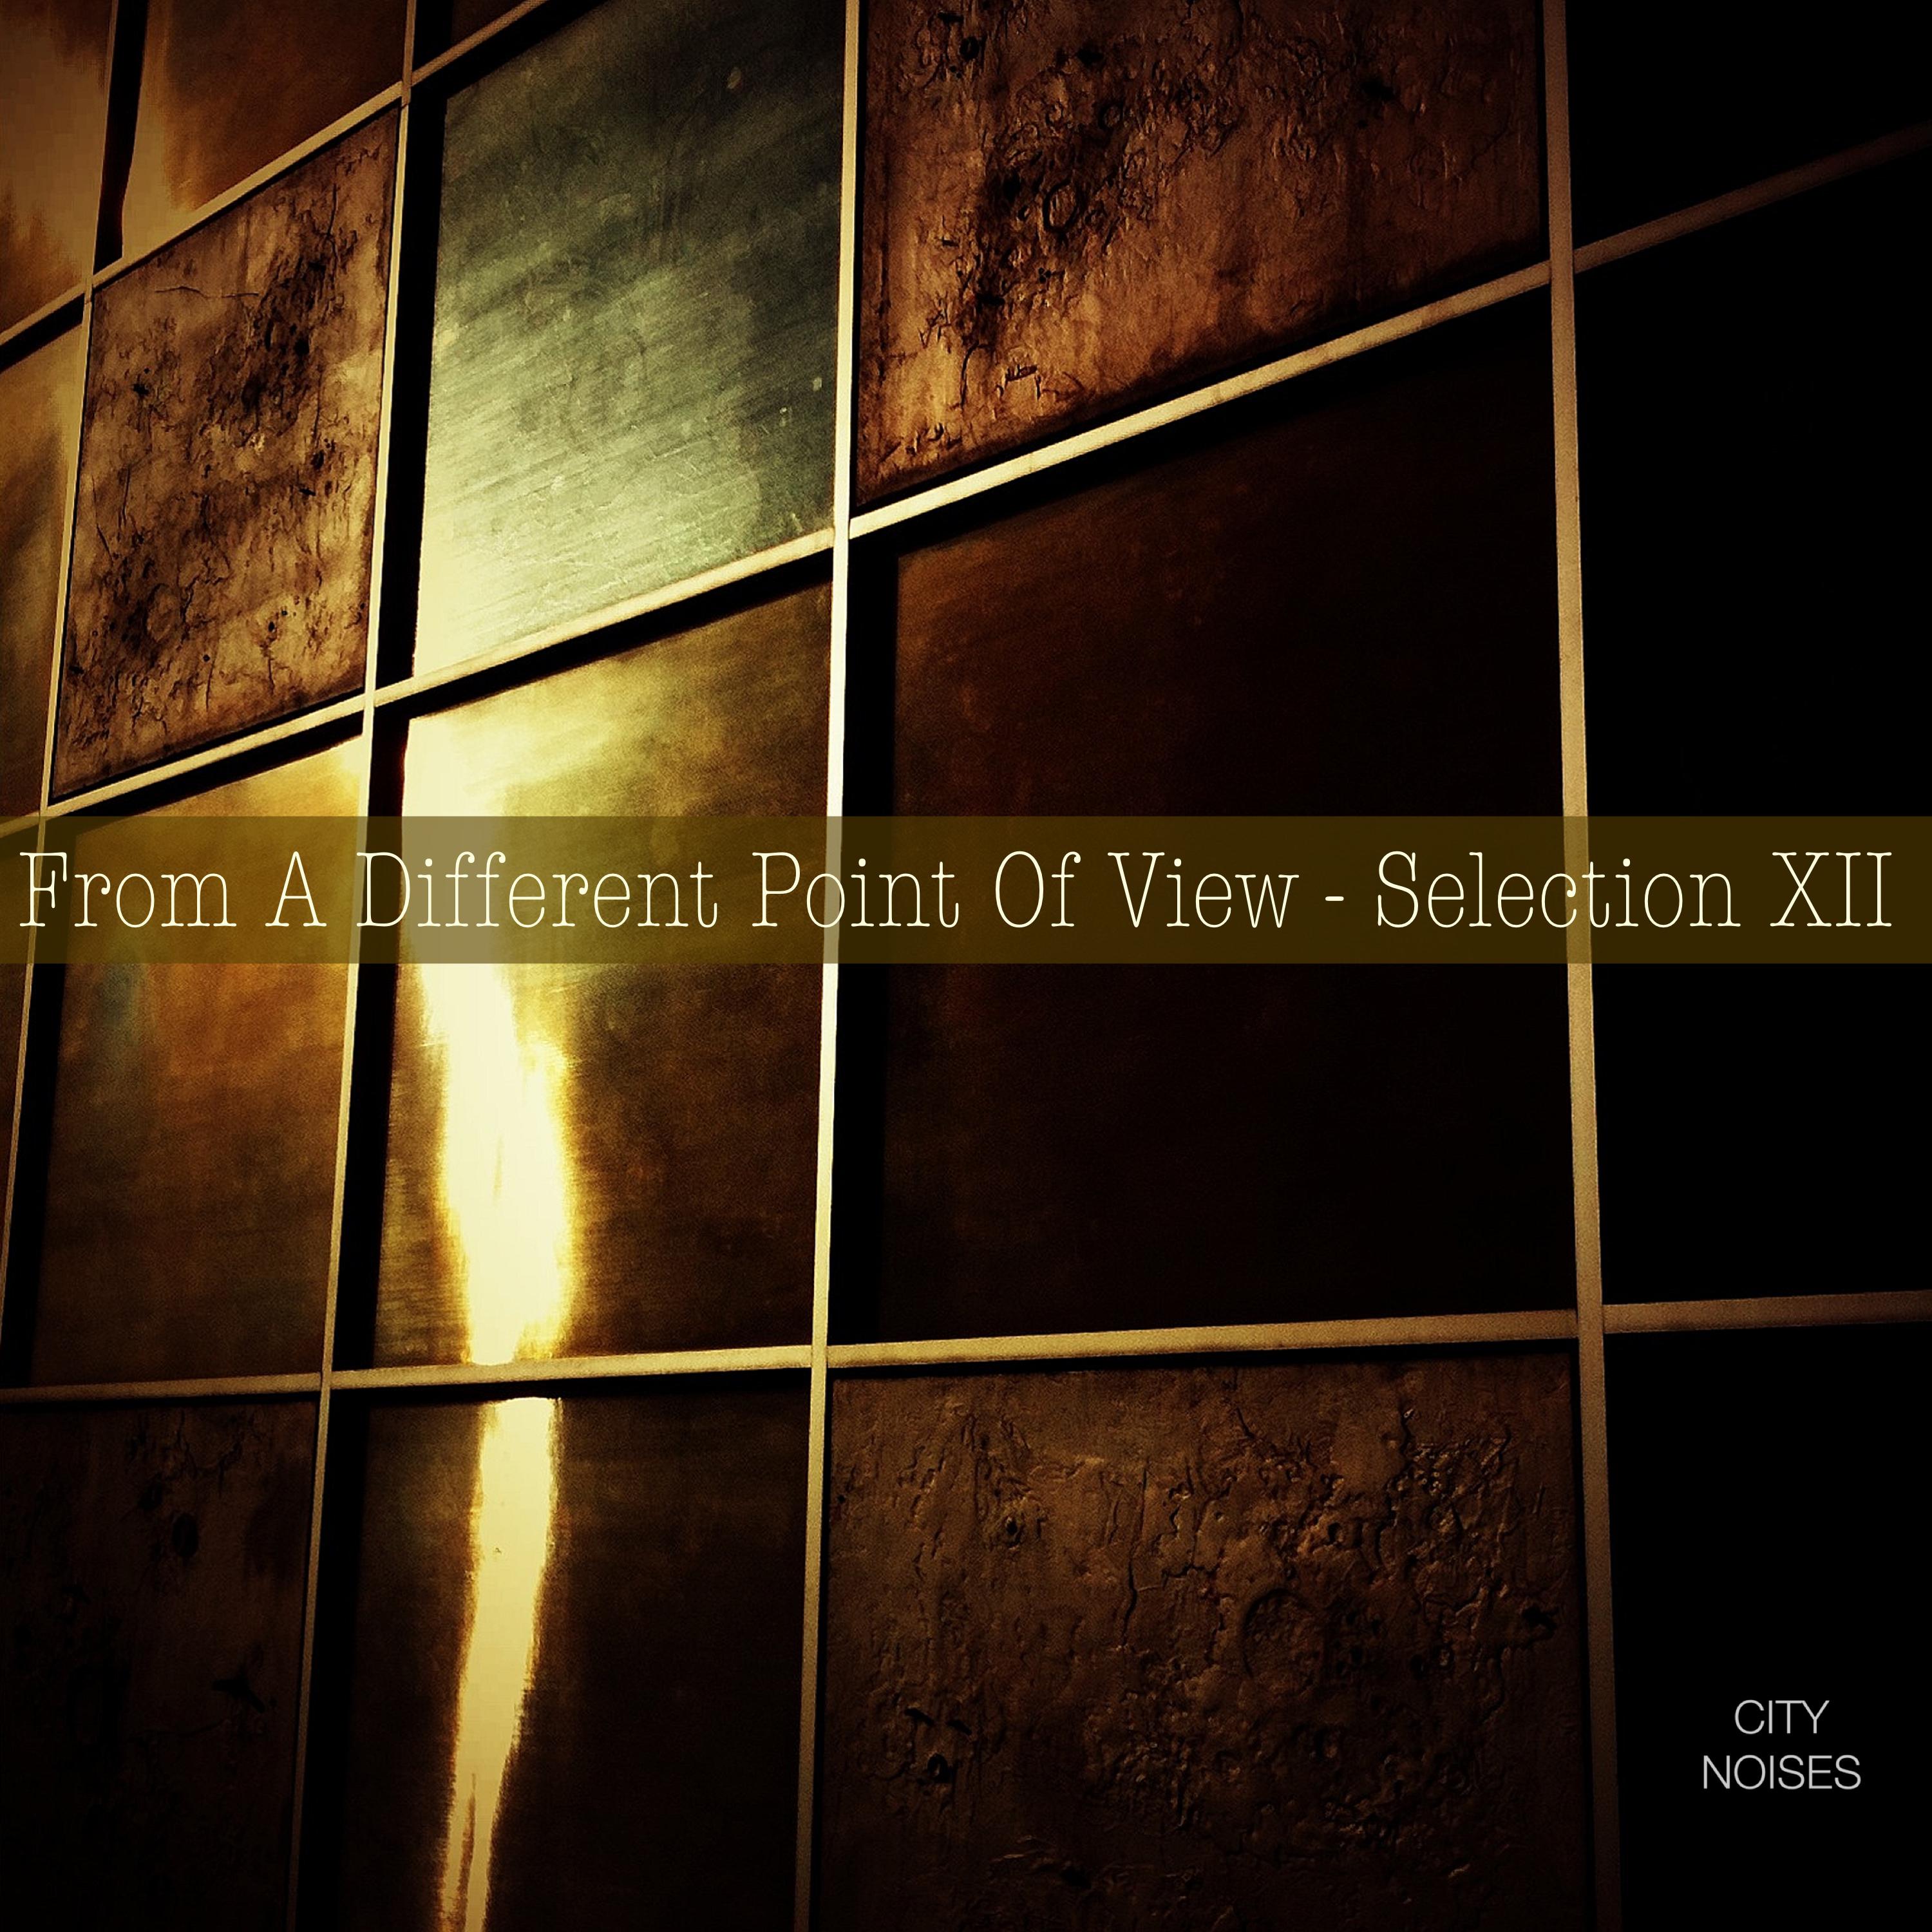 From a Different Point of View - Selection XII